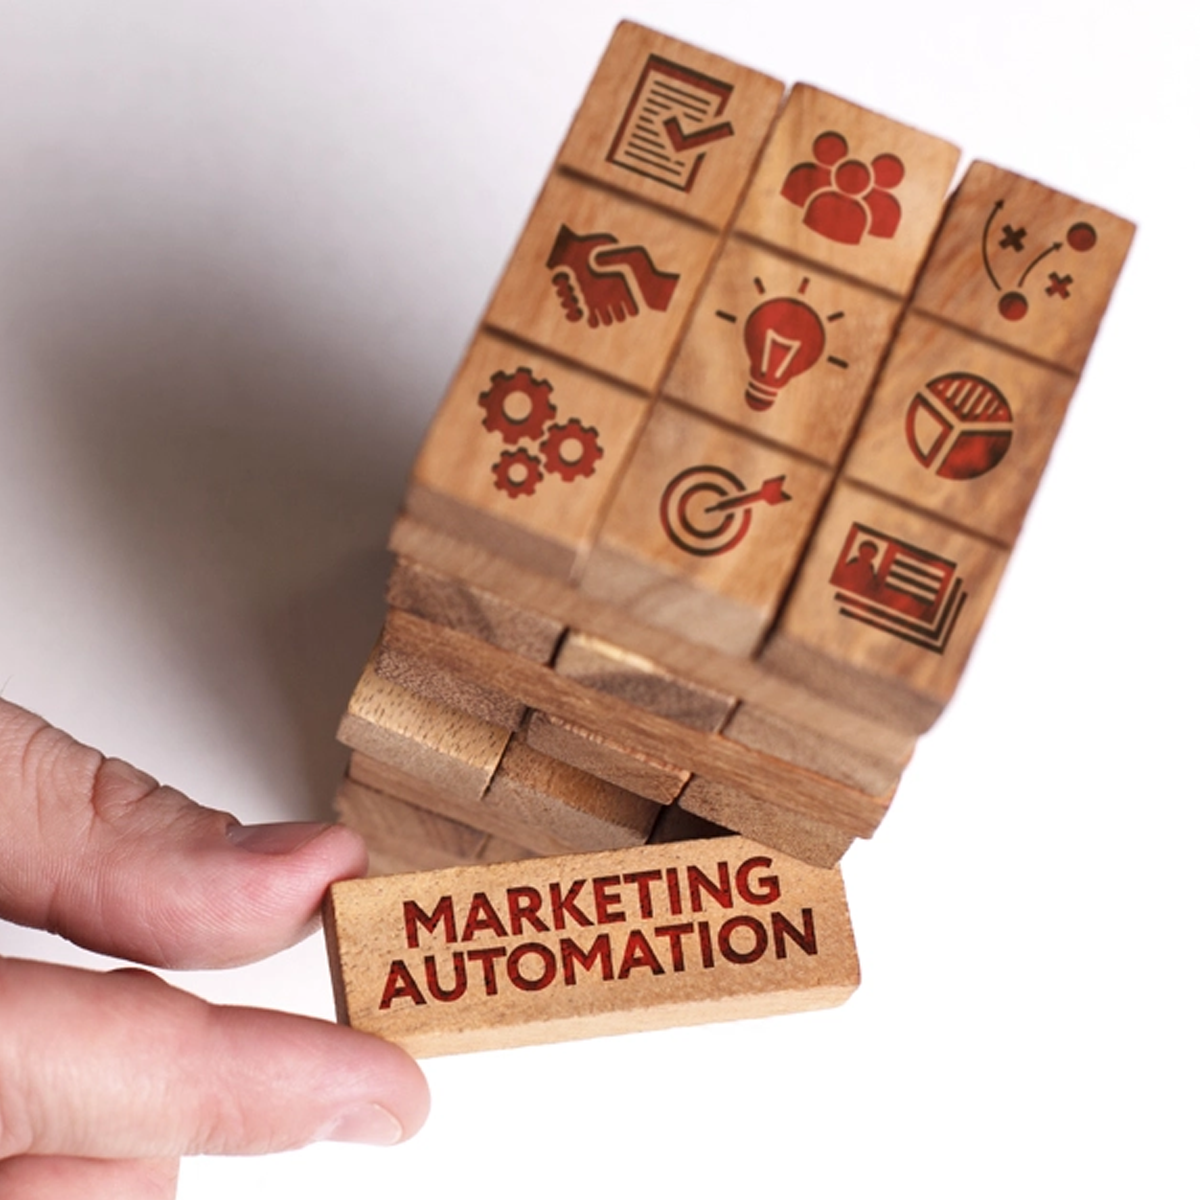 Tacktical Marketing | Thousand Buck Marketing Club | 4 step process for our 4 key areas of service | Picture of jenga blogs representing the different steps that it takes to run Marketing Automation